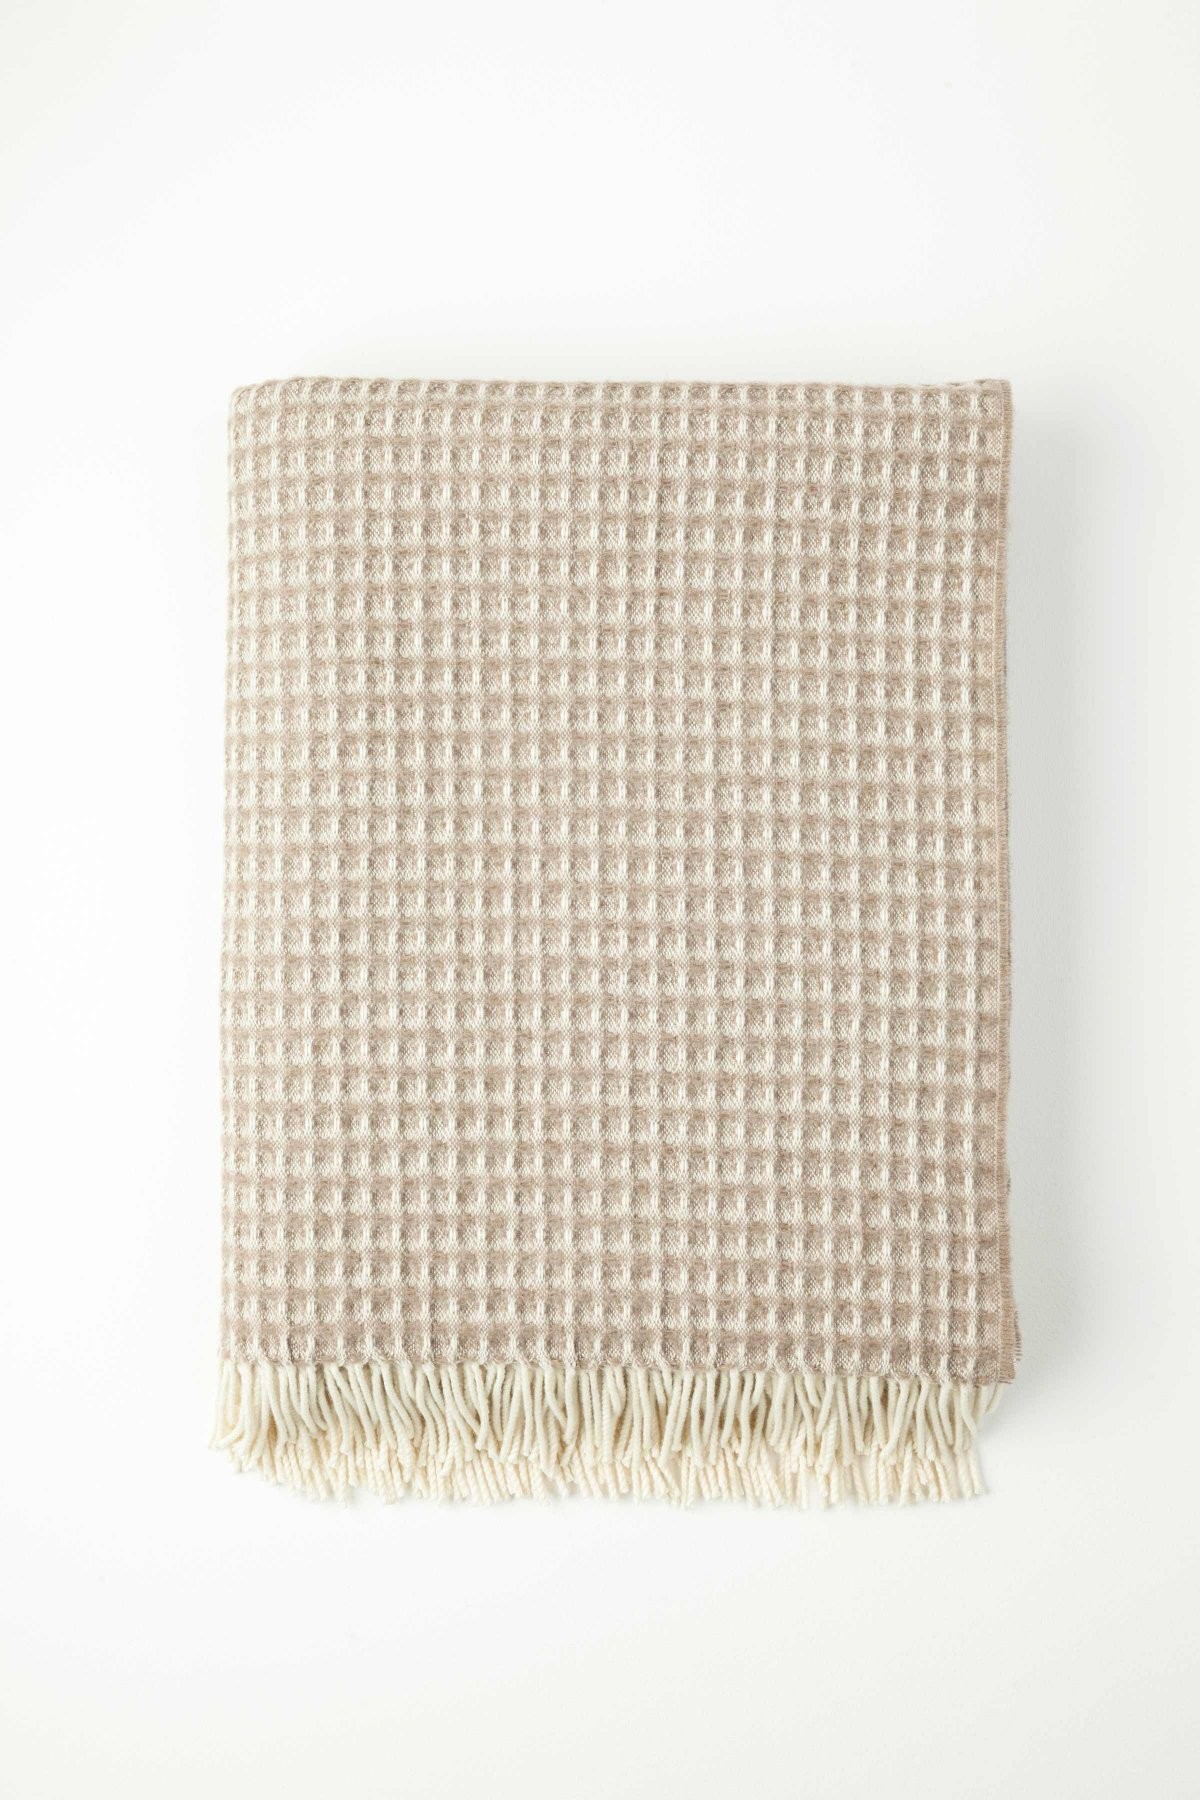 Johnston's of Elgin Cashmere Natural Honeycomb Throw - Natural Brown